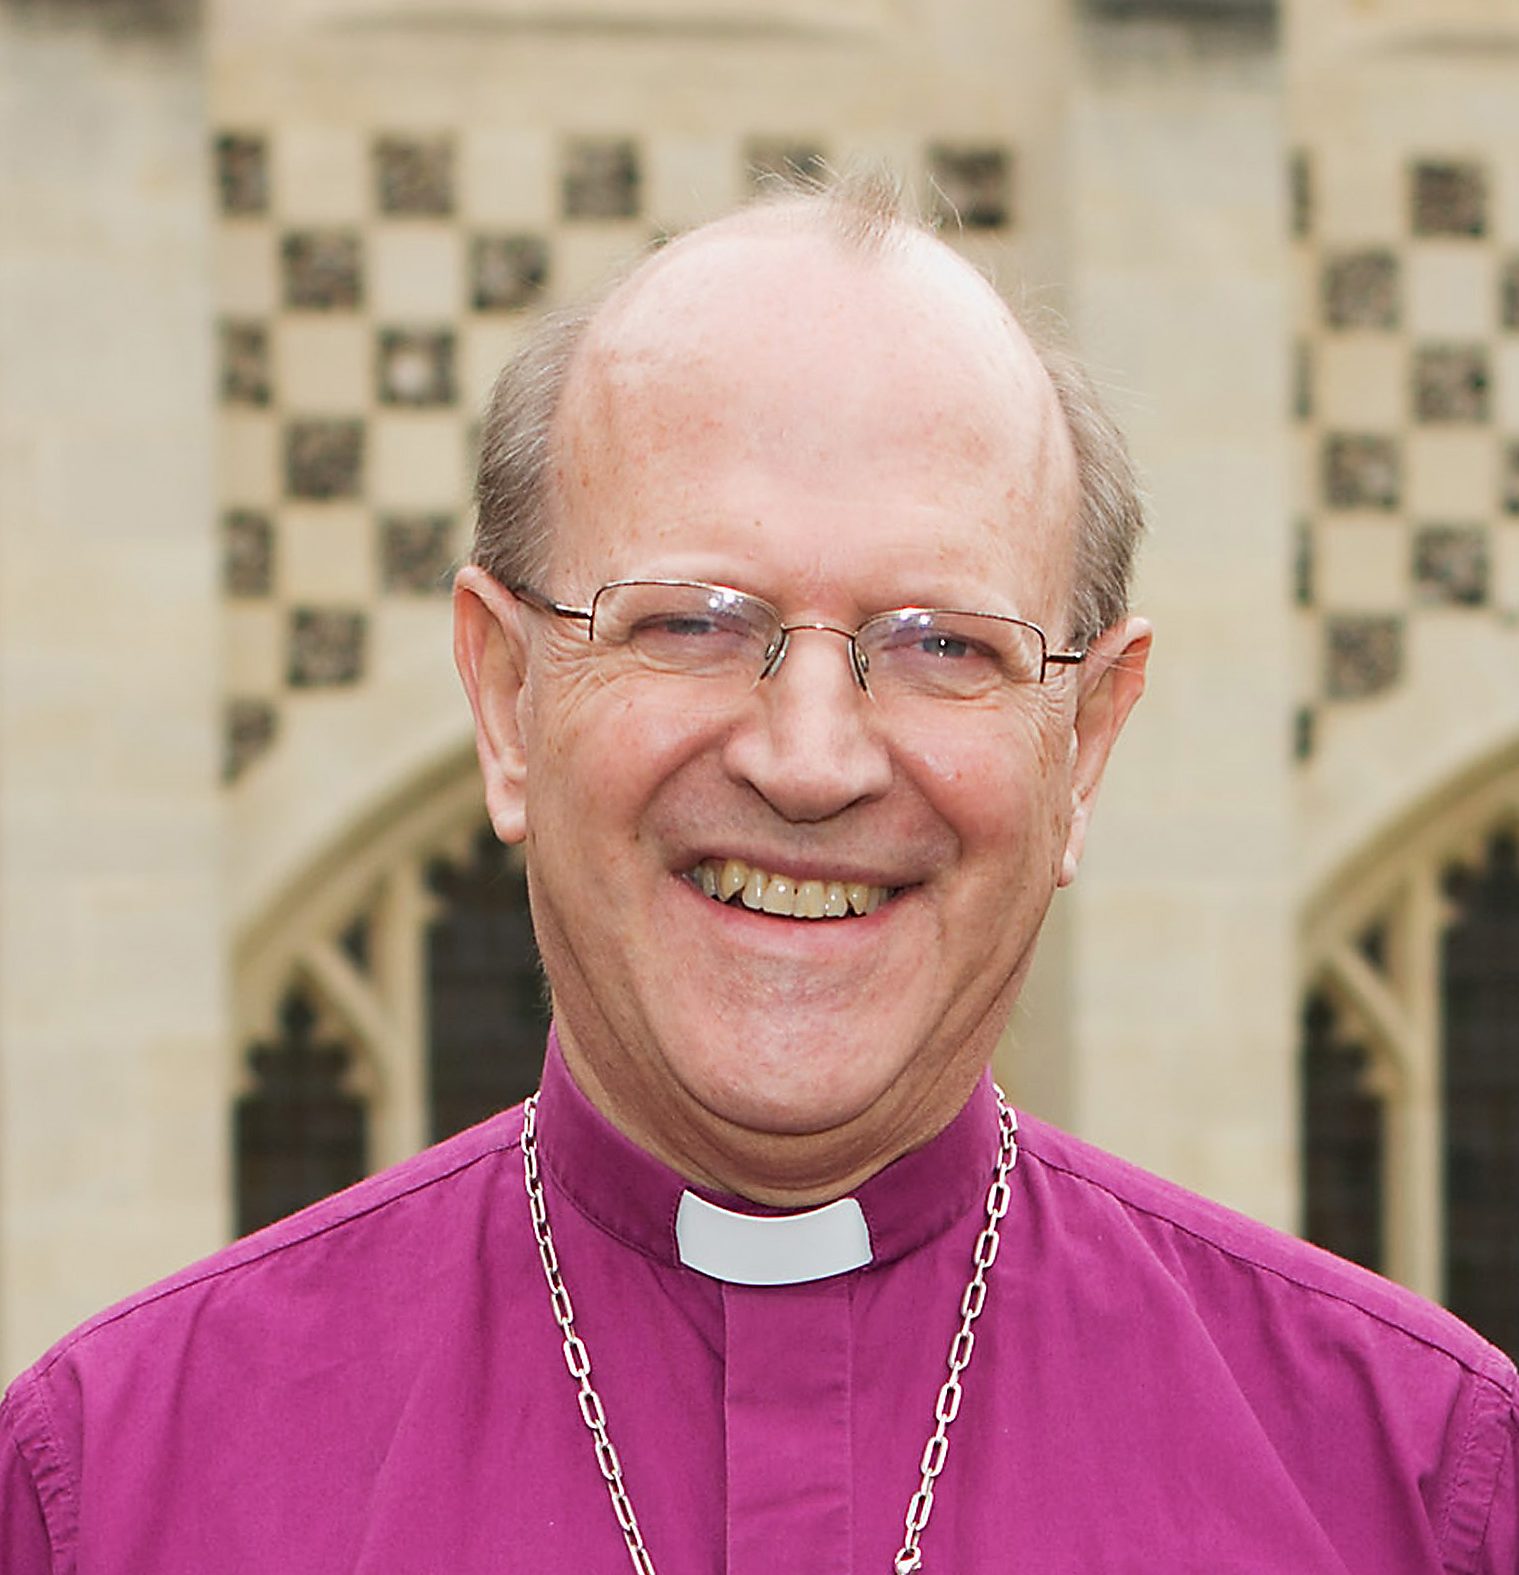 Bishop Martin Seeley and The changing shape of Ministry